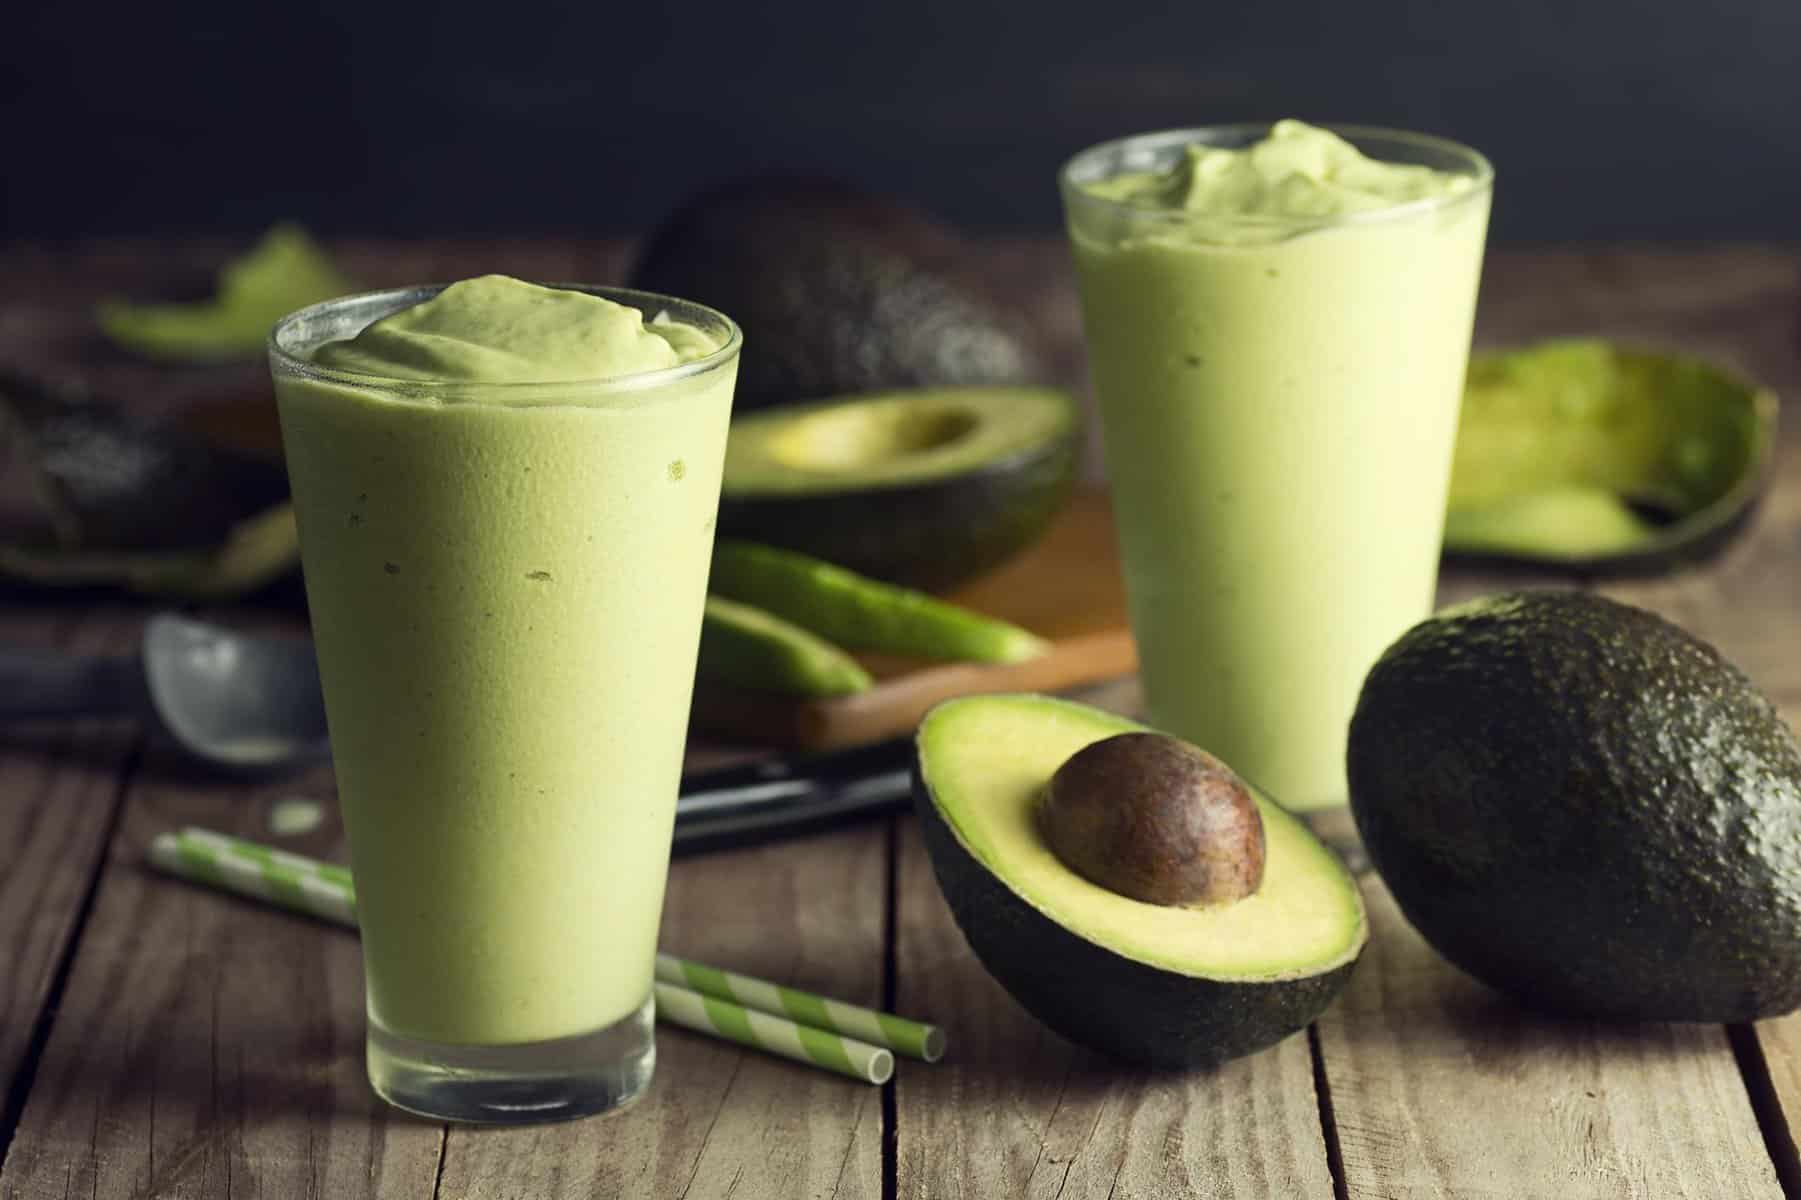  Add some green to your beverage game with this delicious avocado drink 🥑